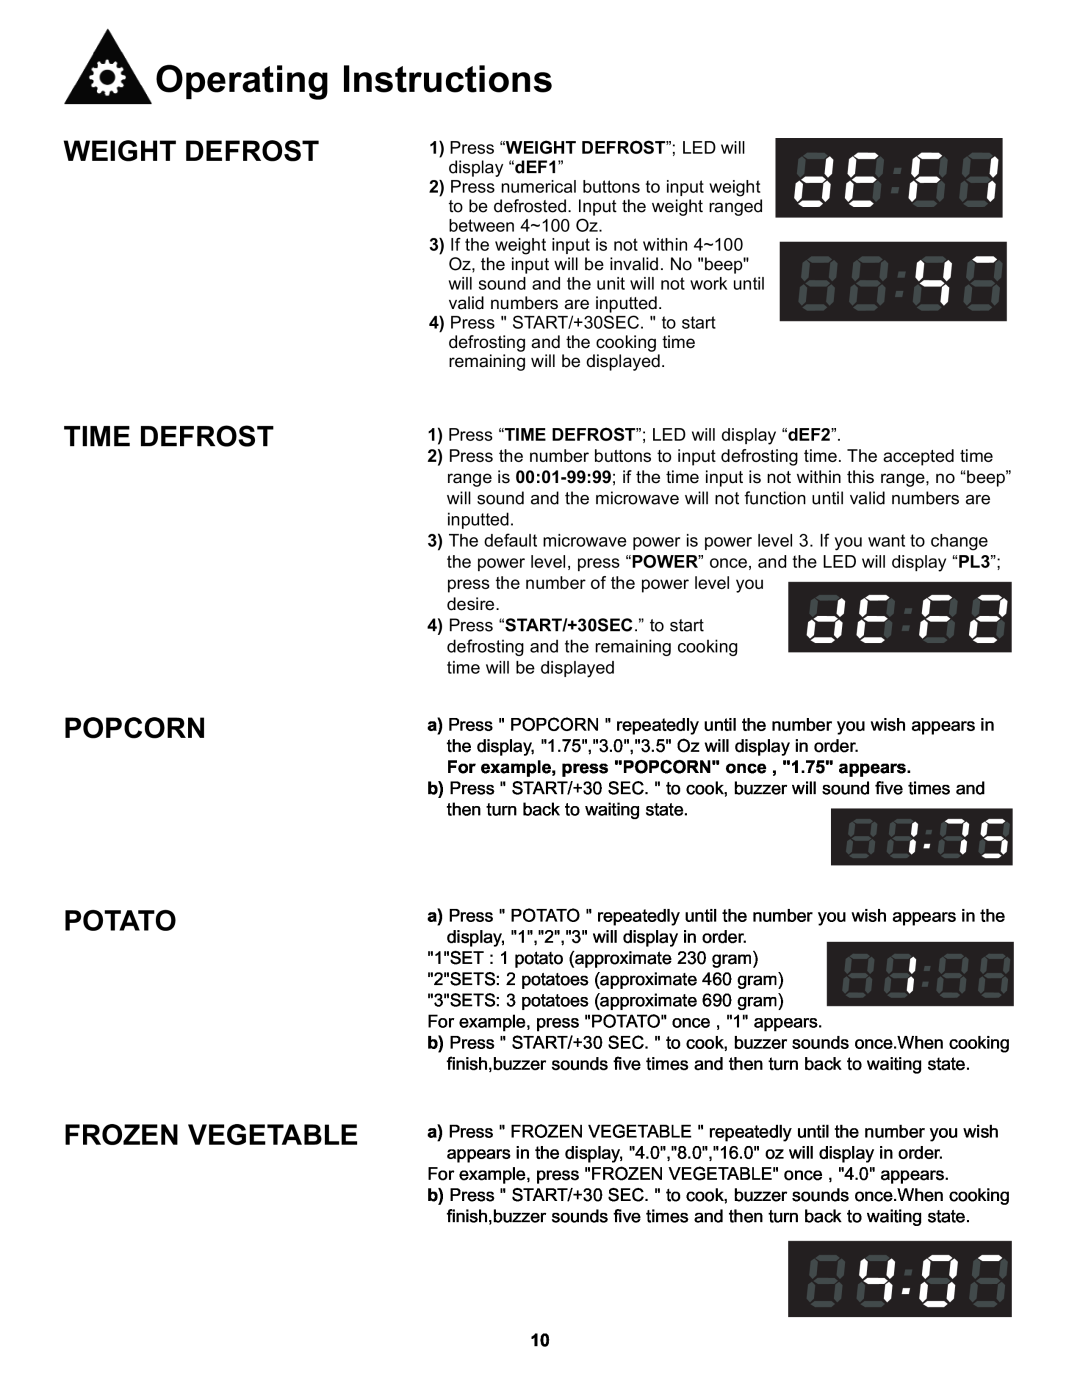 Danby DMW7700WDB, DMW7700BLDB manual Weight Defrost, Time Defrost Popcorn Potato Frozen Vegetable, Operating Instructions 